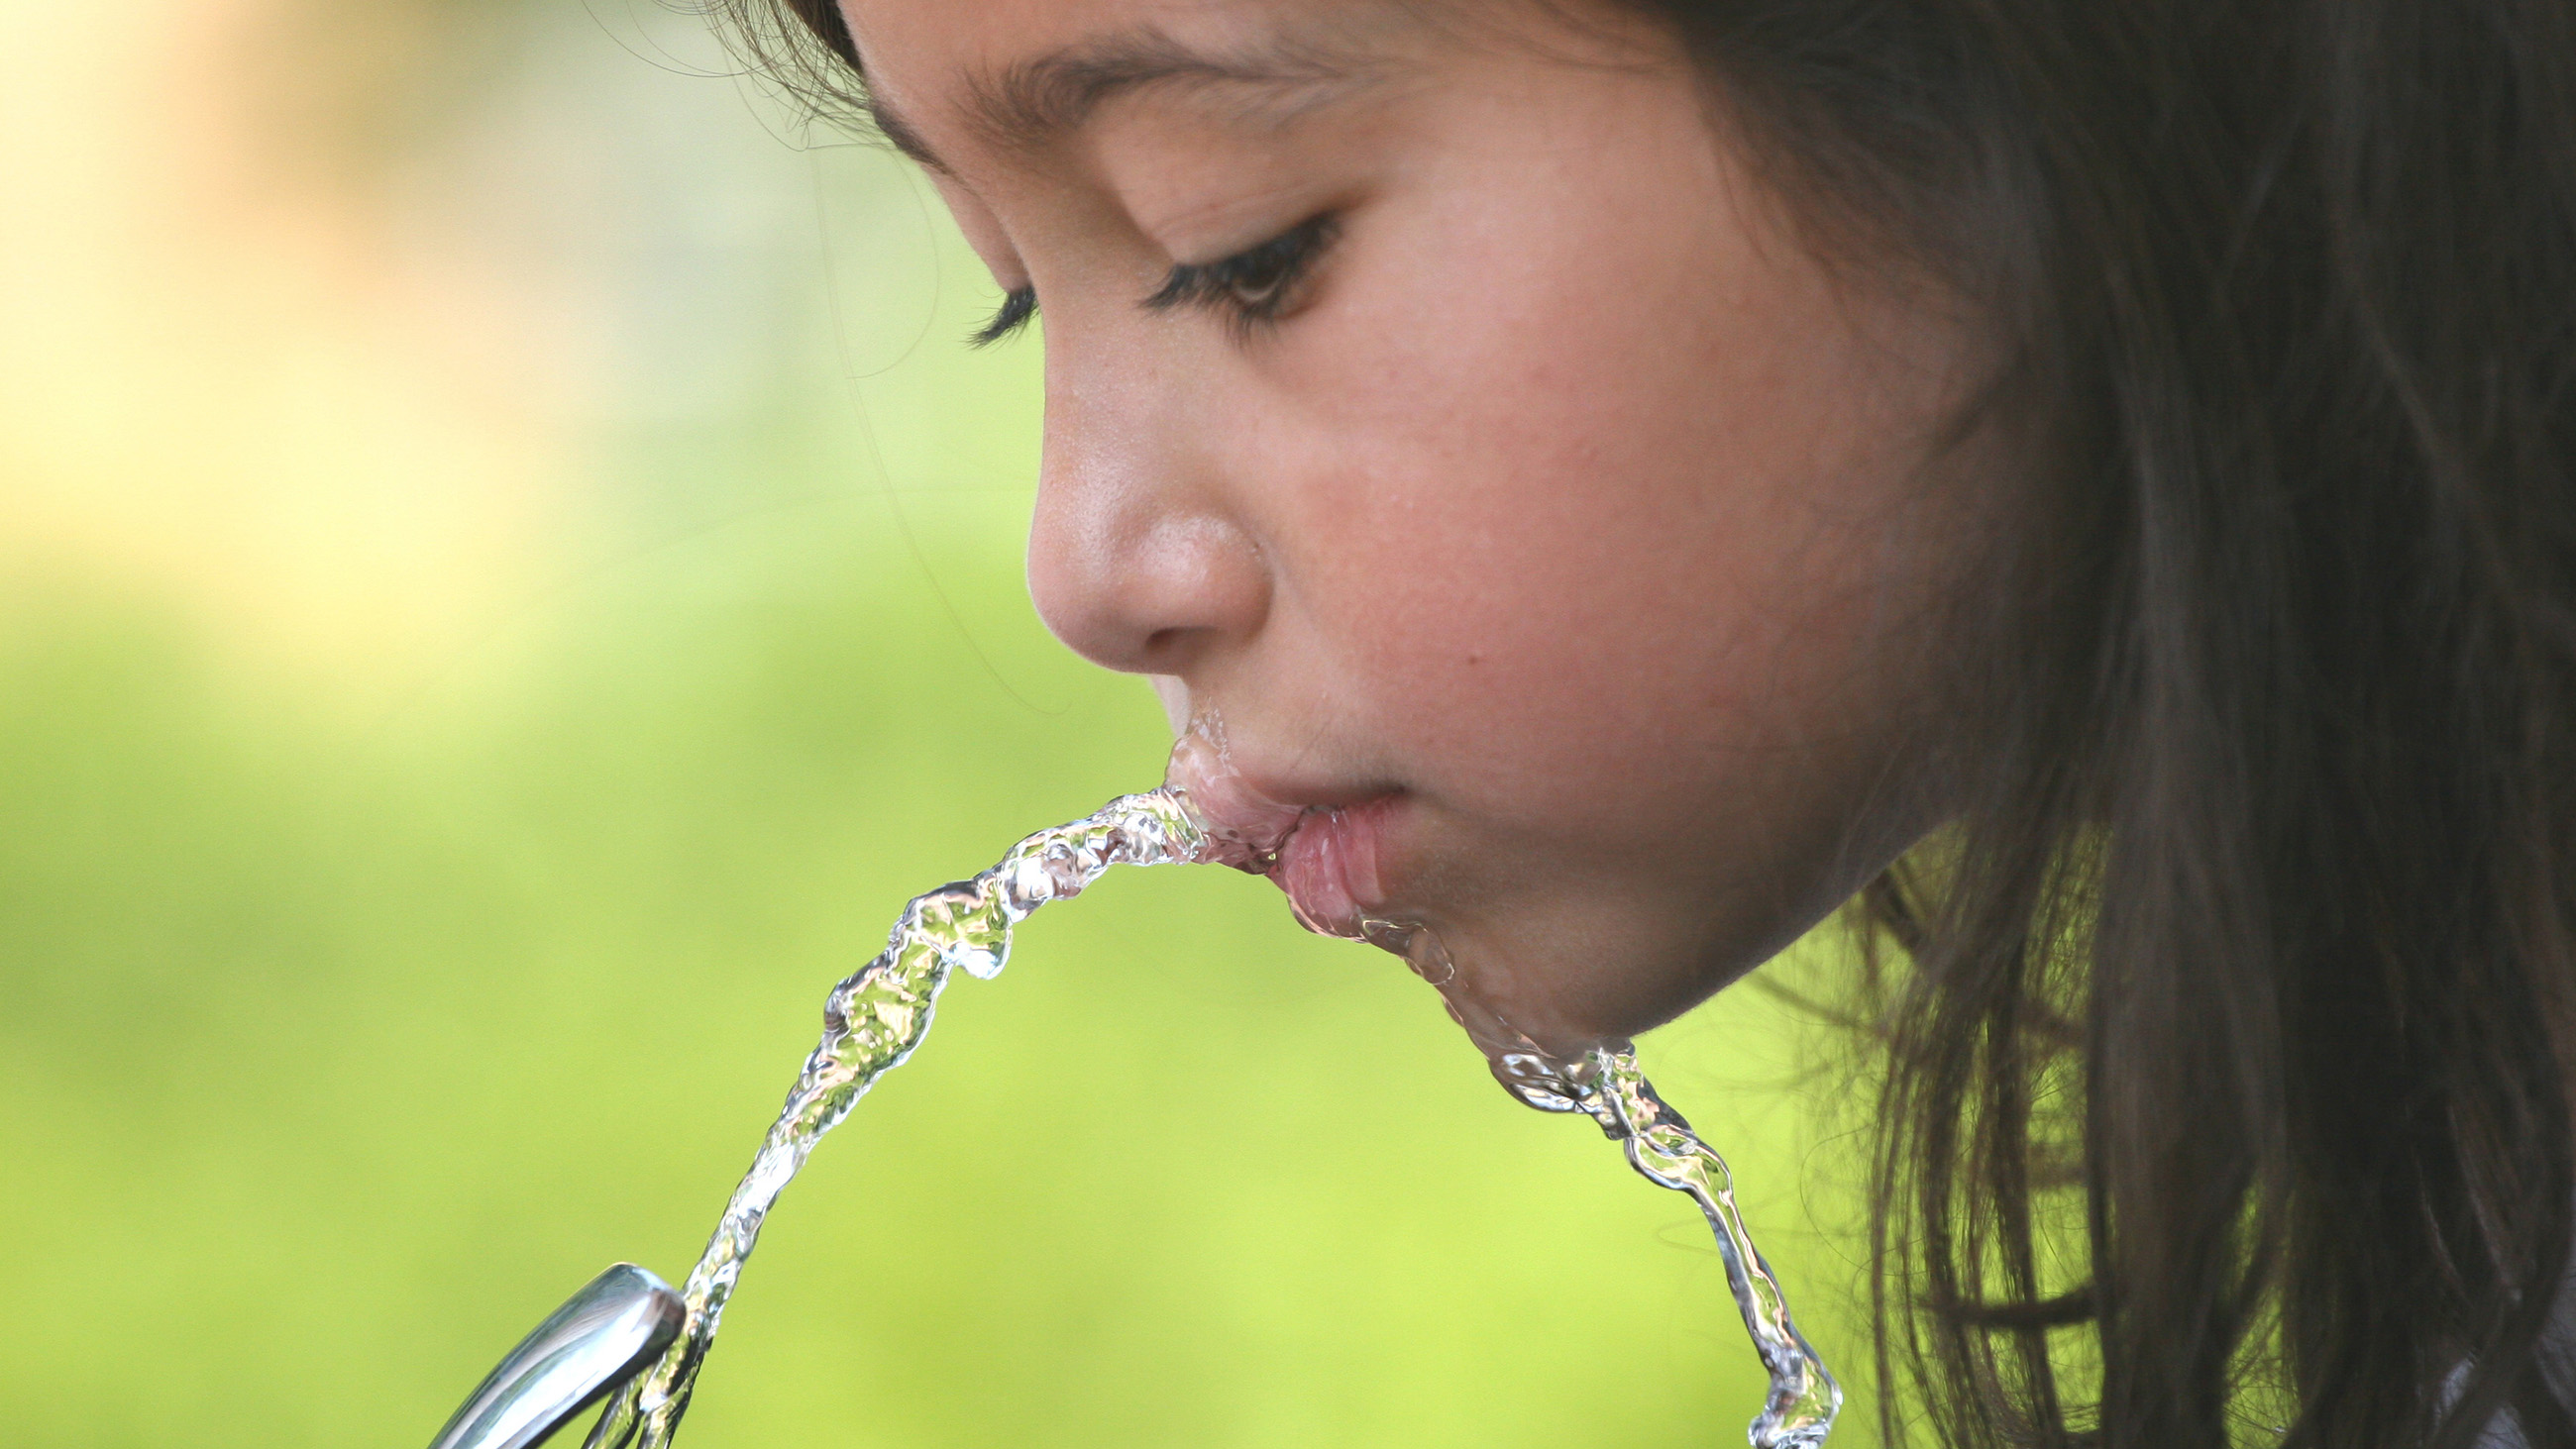 For years, schools in Portland, Oregon have been using water filters that don't take out lead.